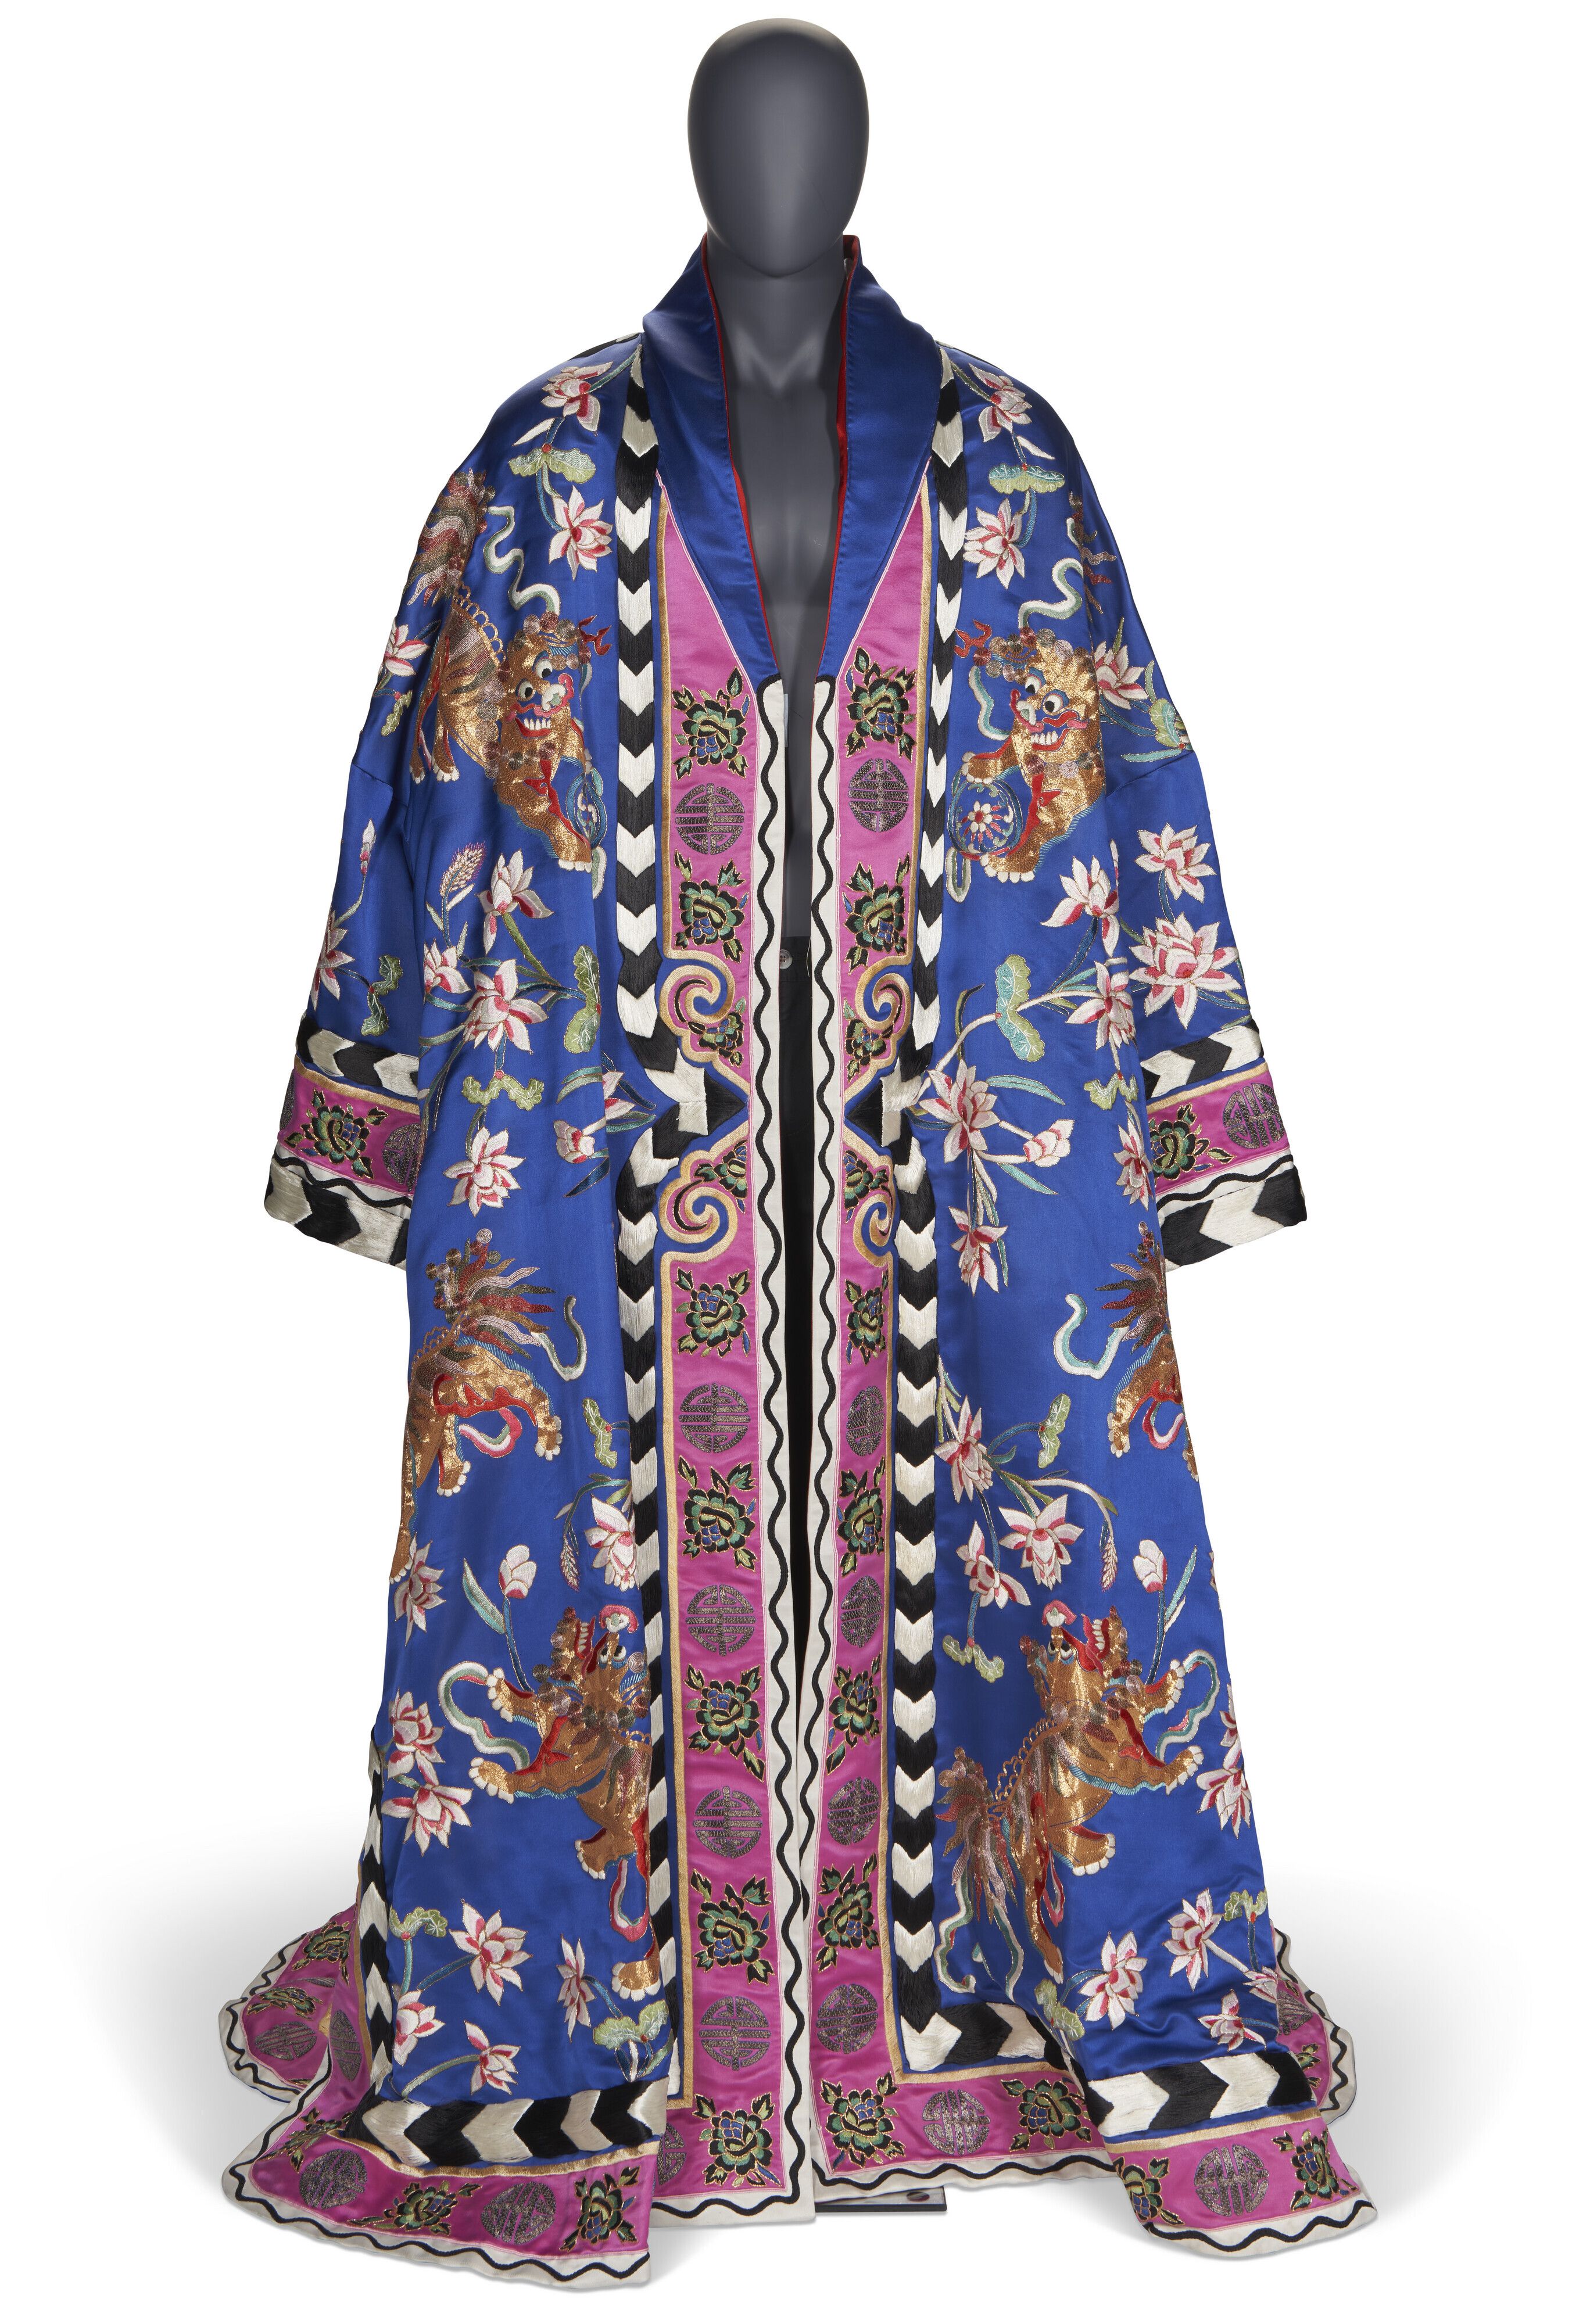 Having a Moment in André Leon Talley's Collection at Christie's: A